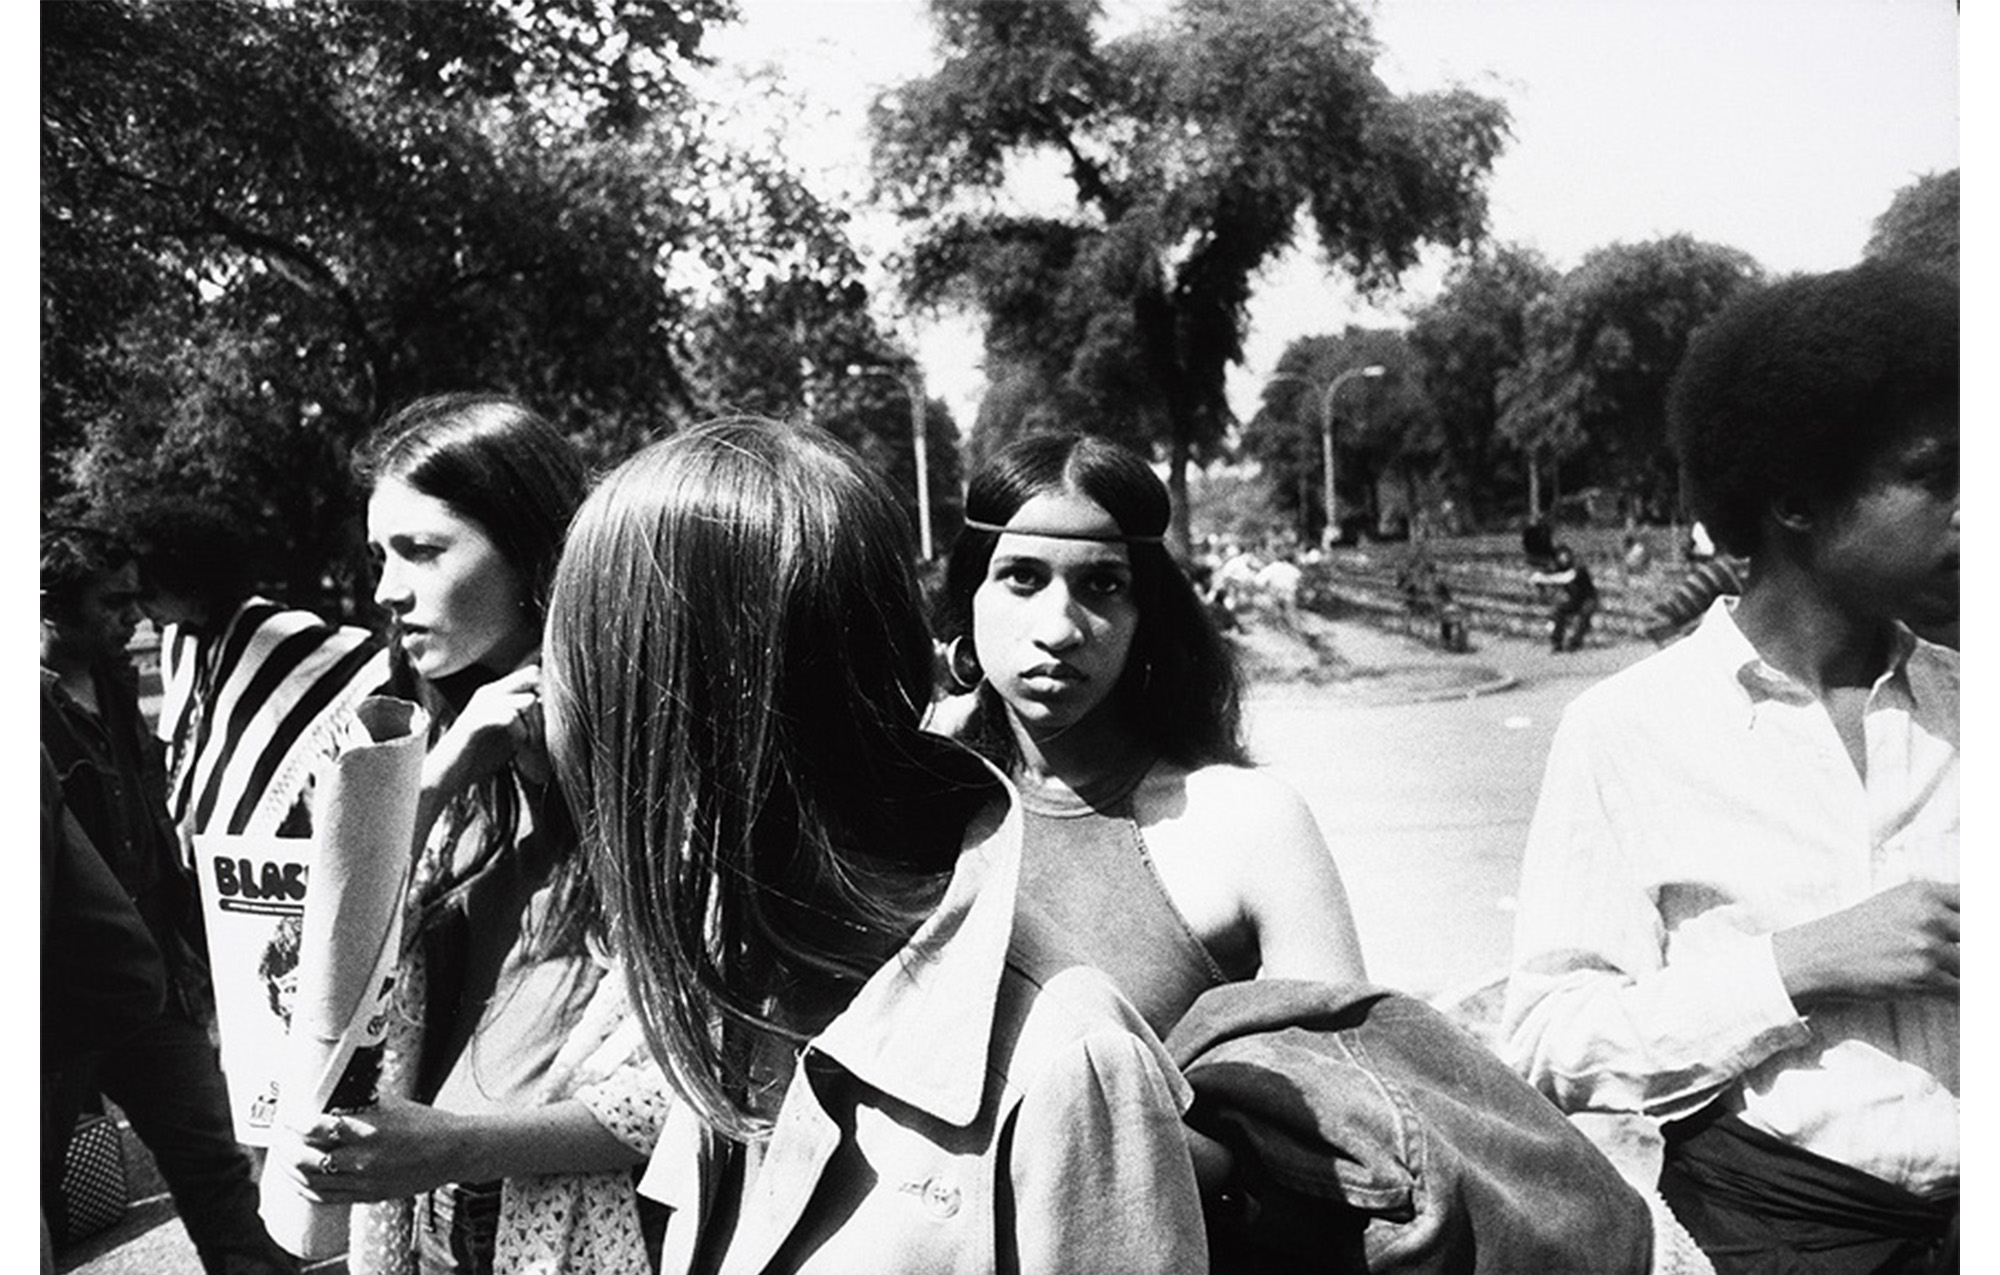 walkway in a park, close-up of group of young people, black woman in center with hair parted in middle and thin headband looking directly into the camera